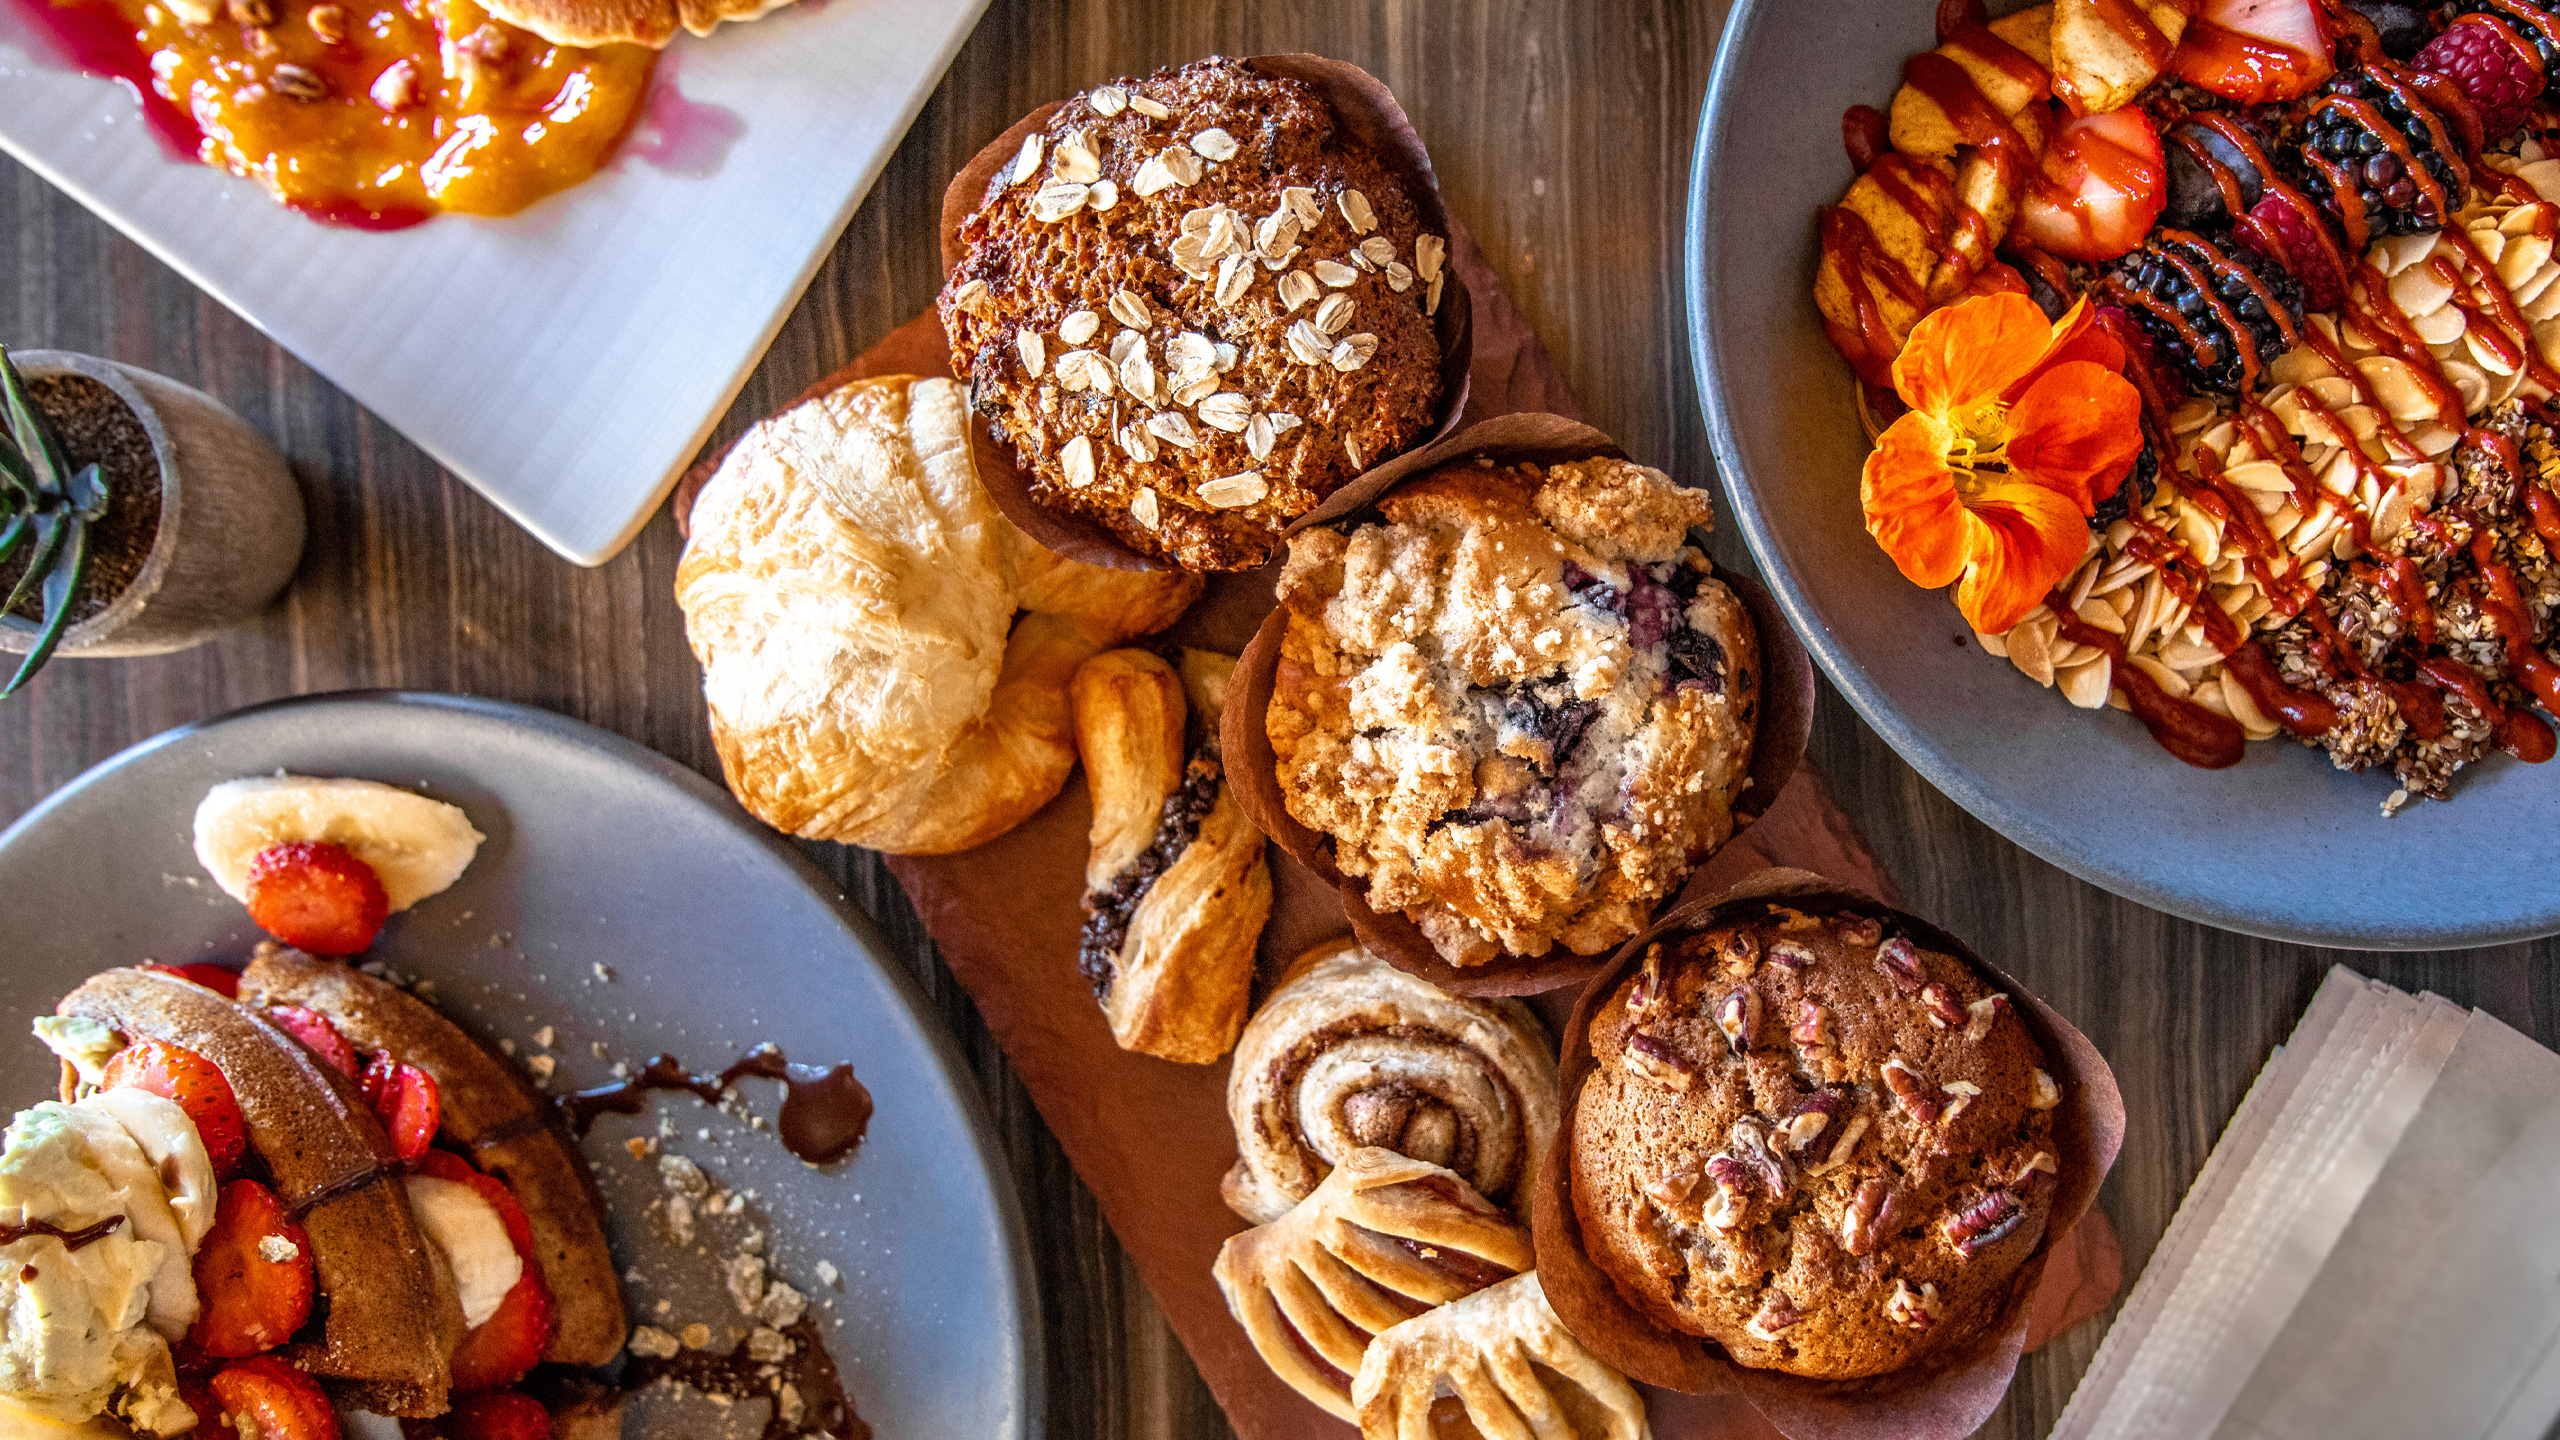 pastries and muffins on a plate